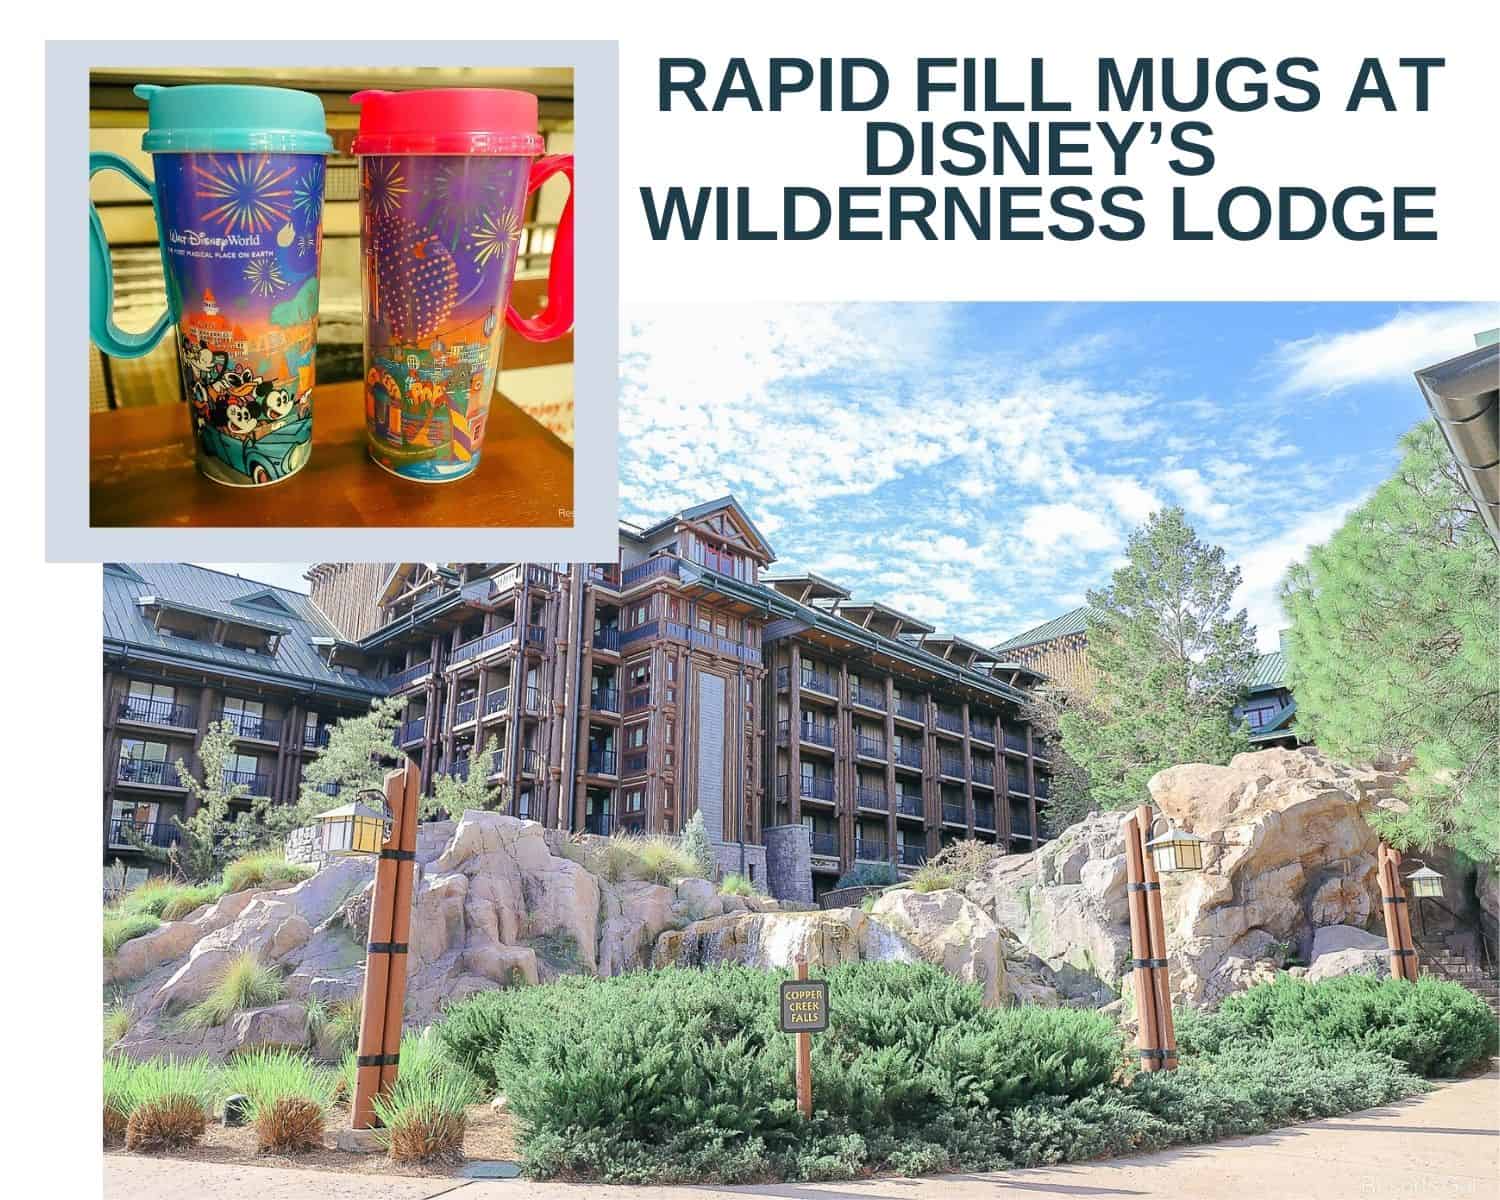 Rapid Fill Mugs, Beverages, & Refill Stations at Disney’s Wilderness Lodge (2 Locations)